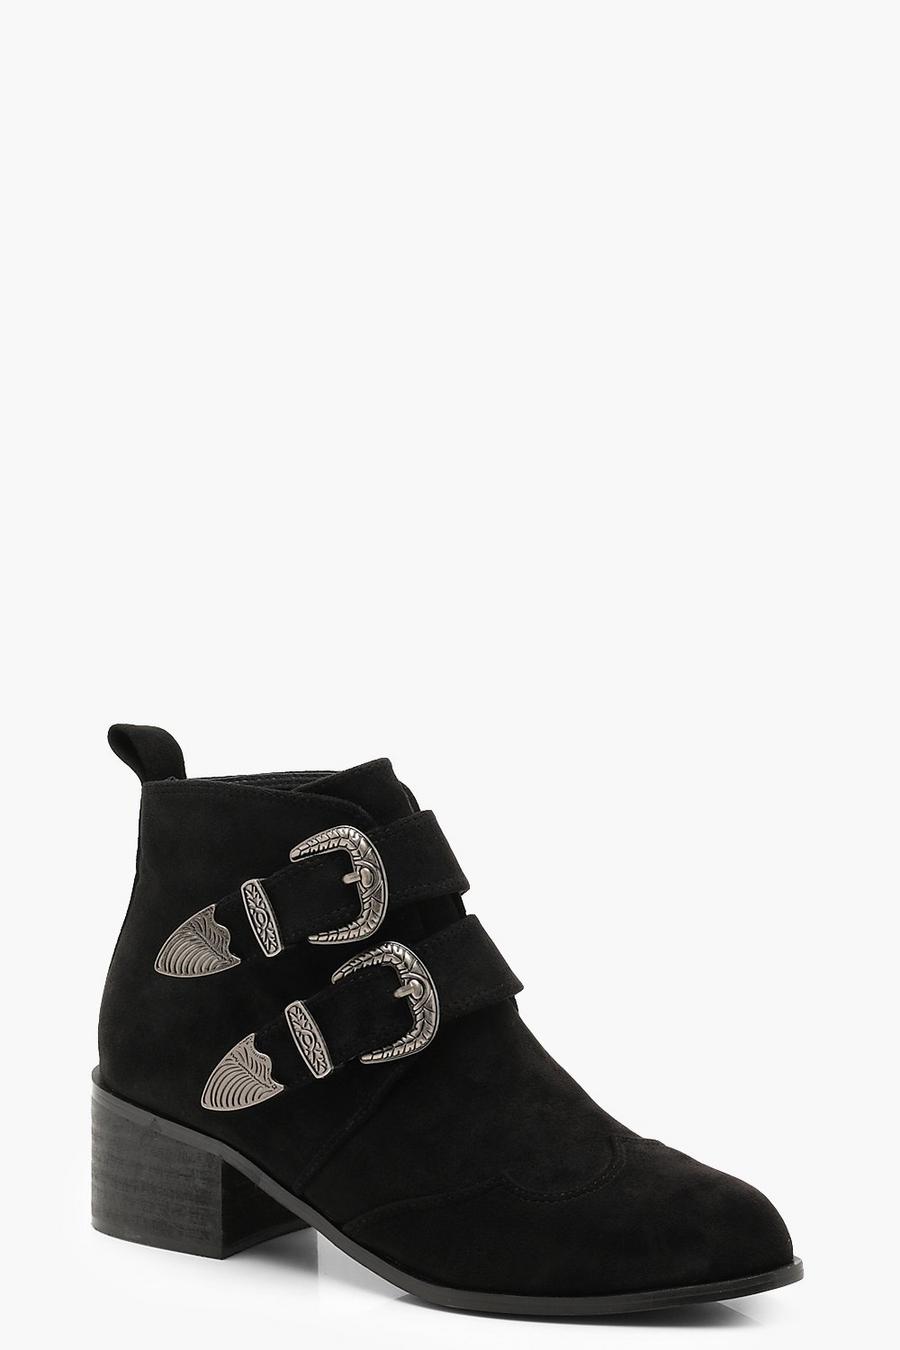 Black Western Buckle Chelsea Ankle Boots image number 1